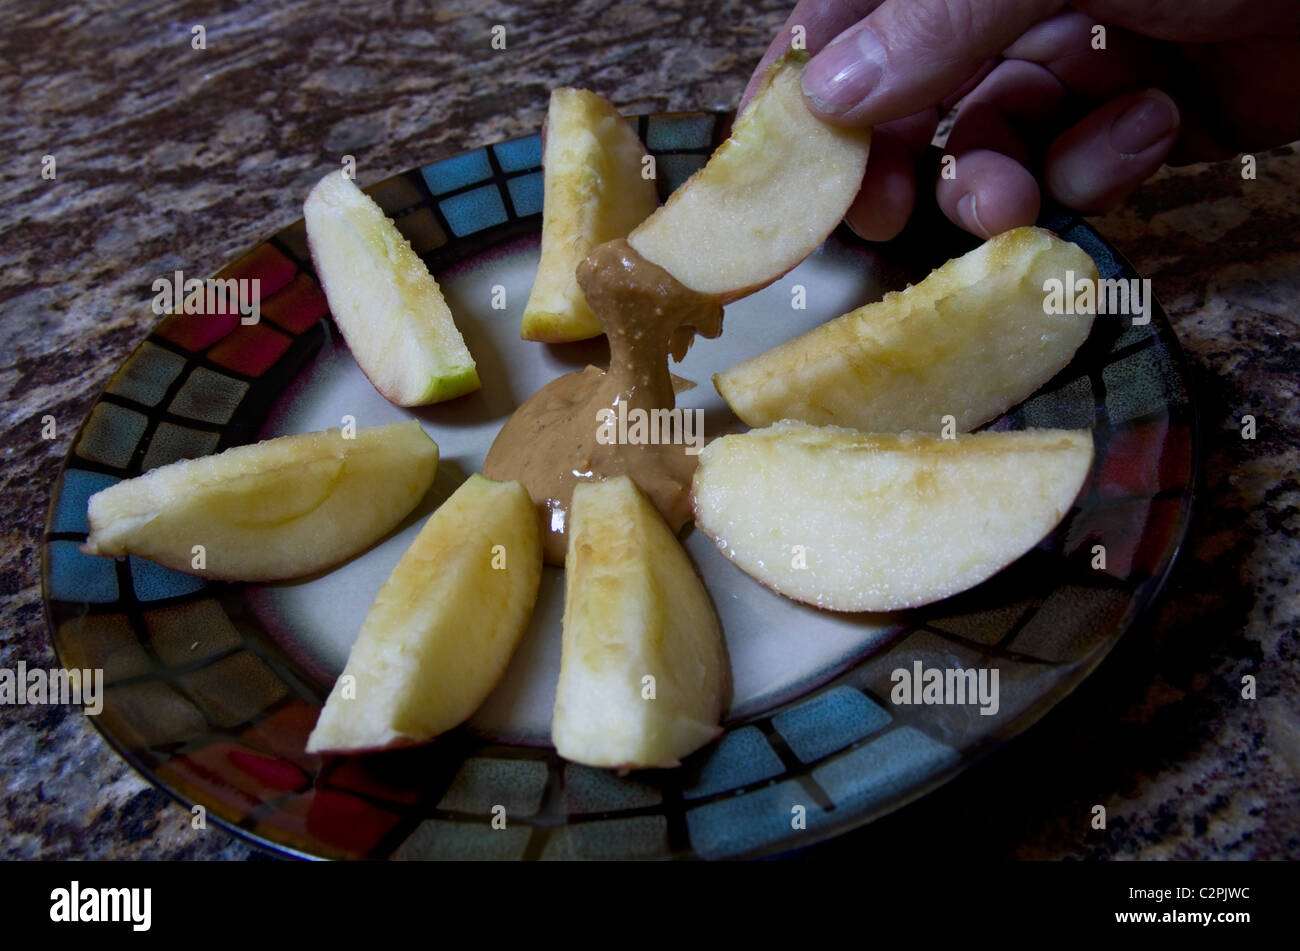 Sliced apple with peanut butter Stock Photo